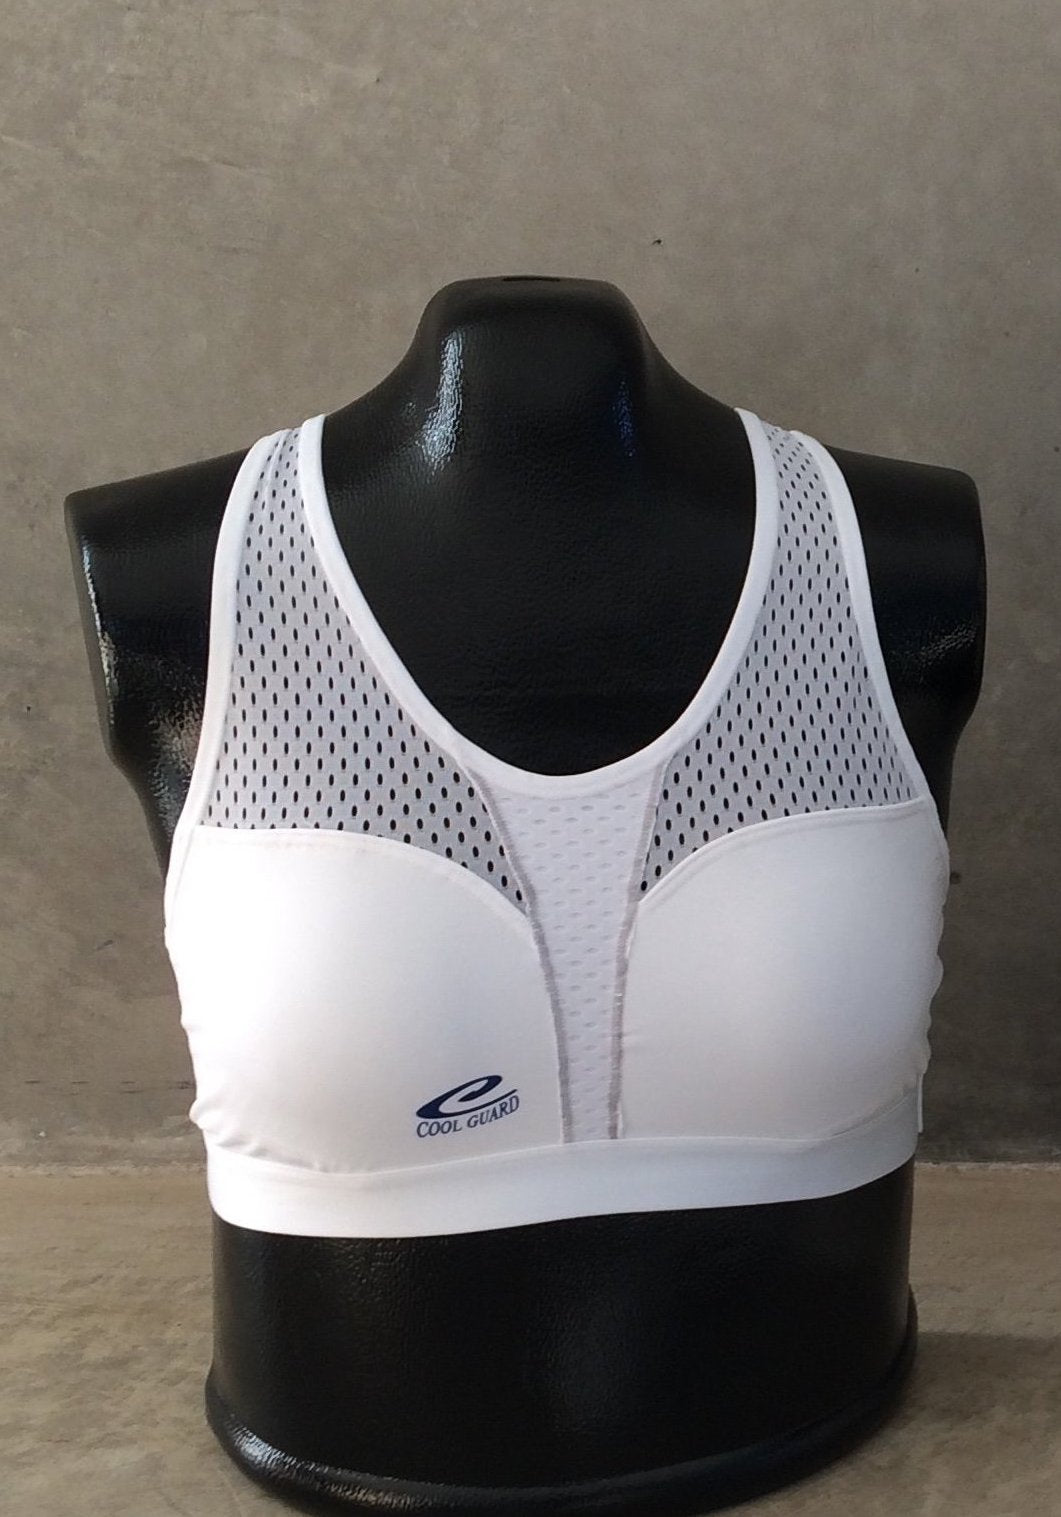 CoolGuard — Bra/Top Only